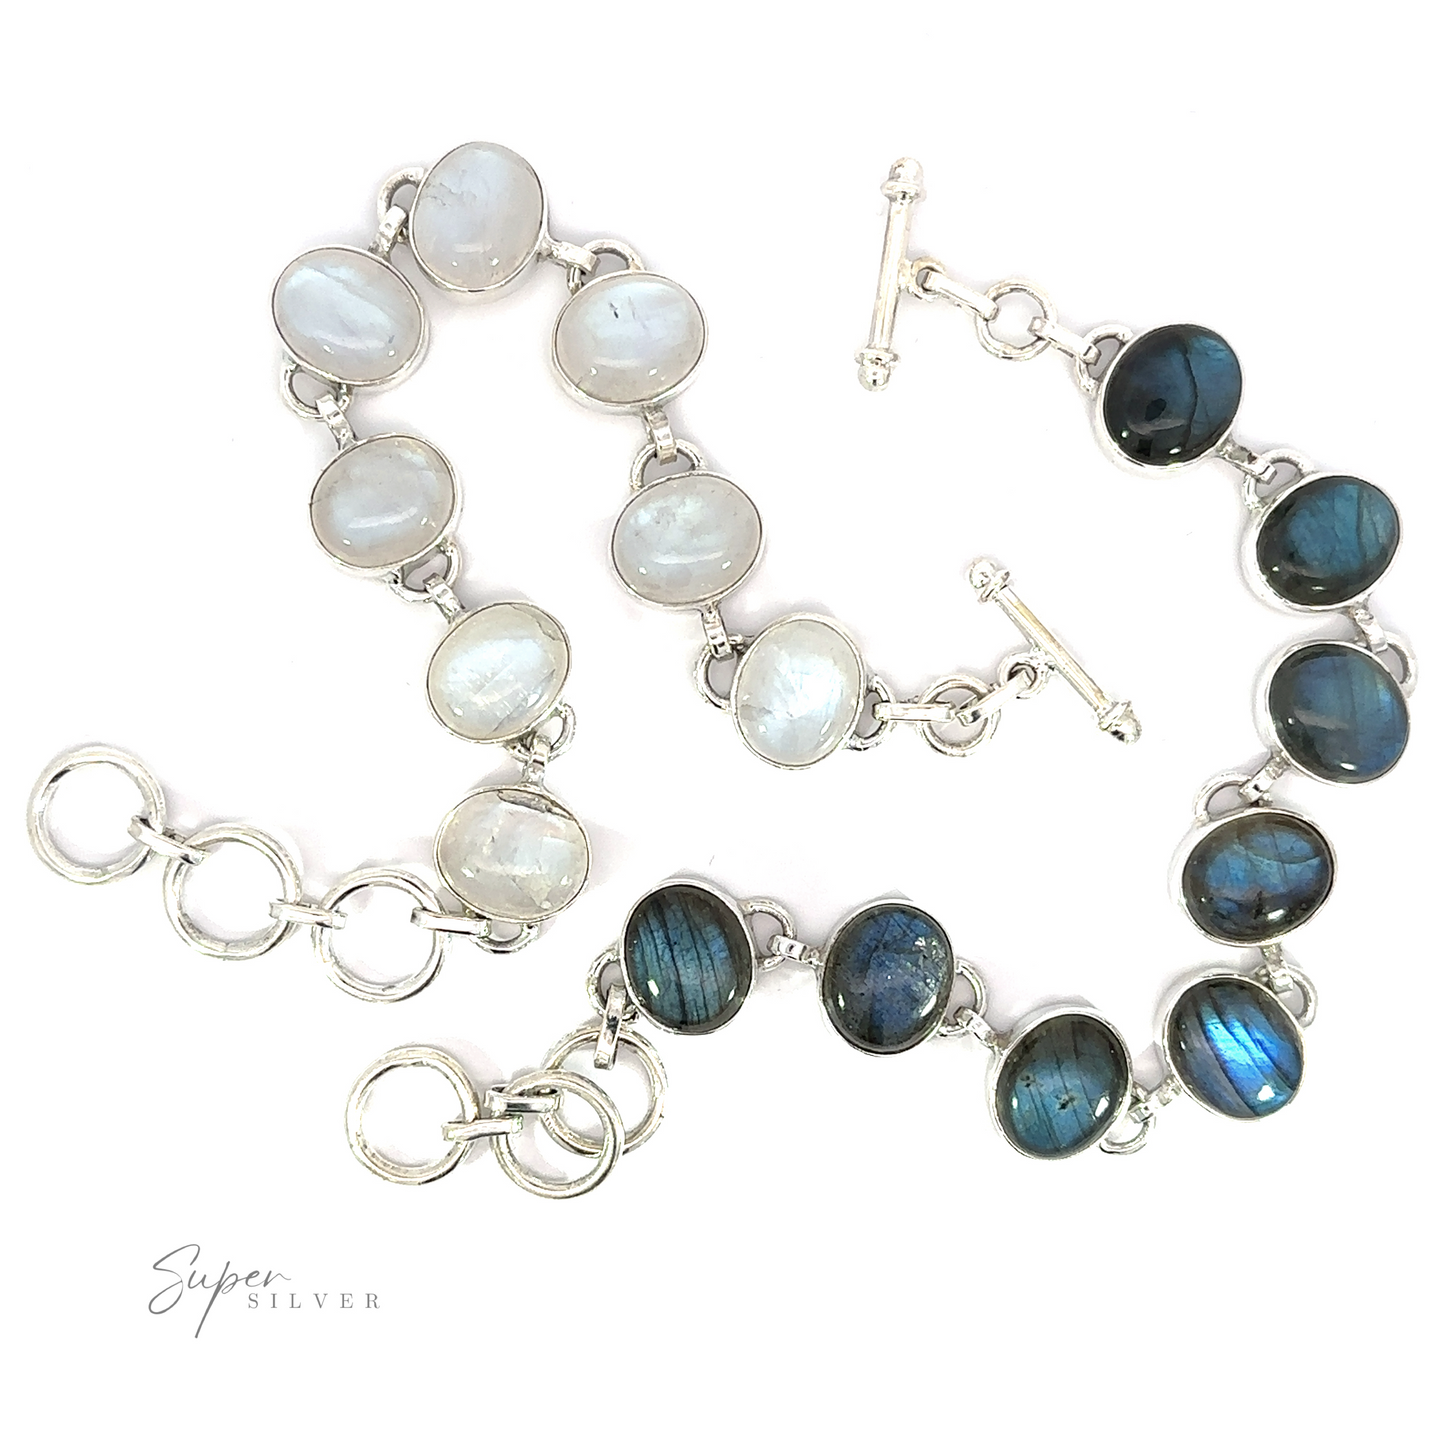 Two Statement Oval Gemstone Bracelets with oval moonstone and labradorite set in silver, displayed on a white background.